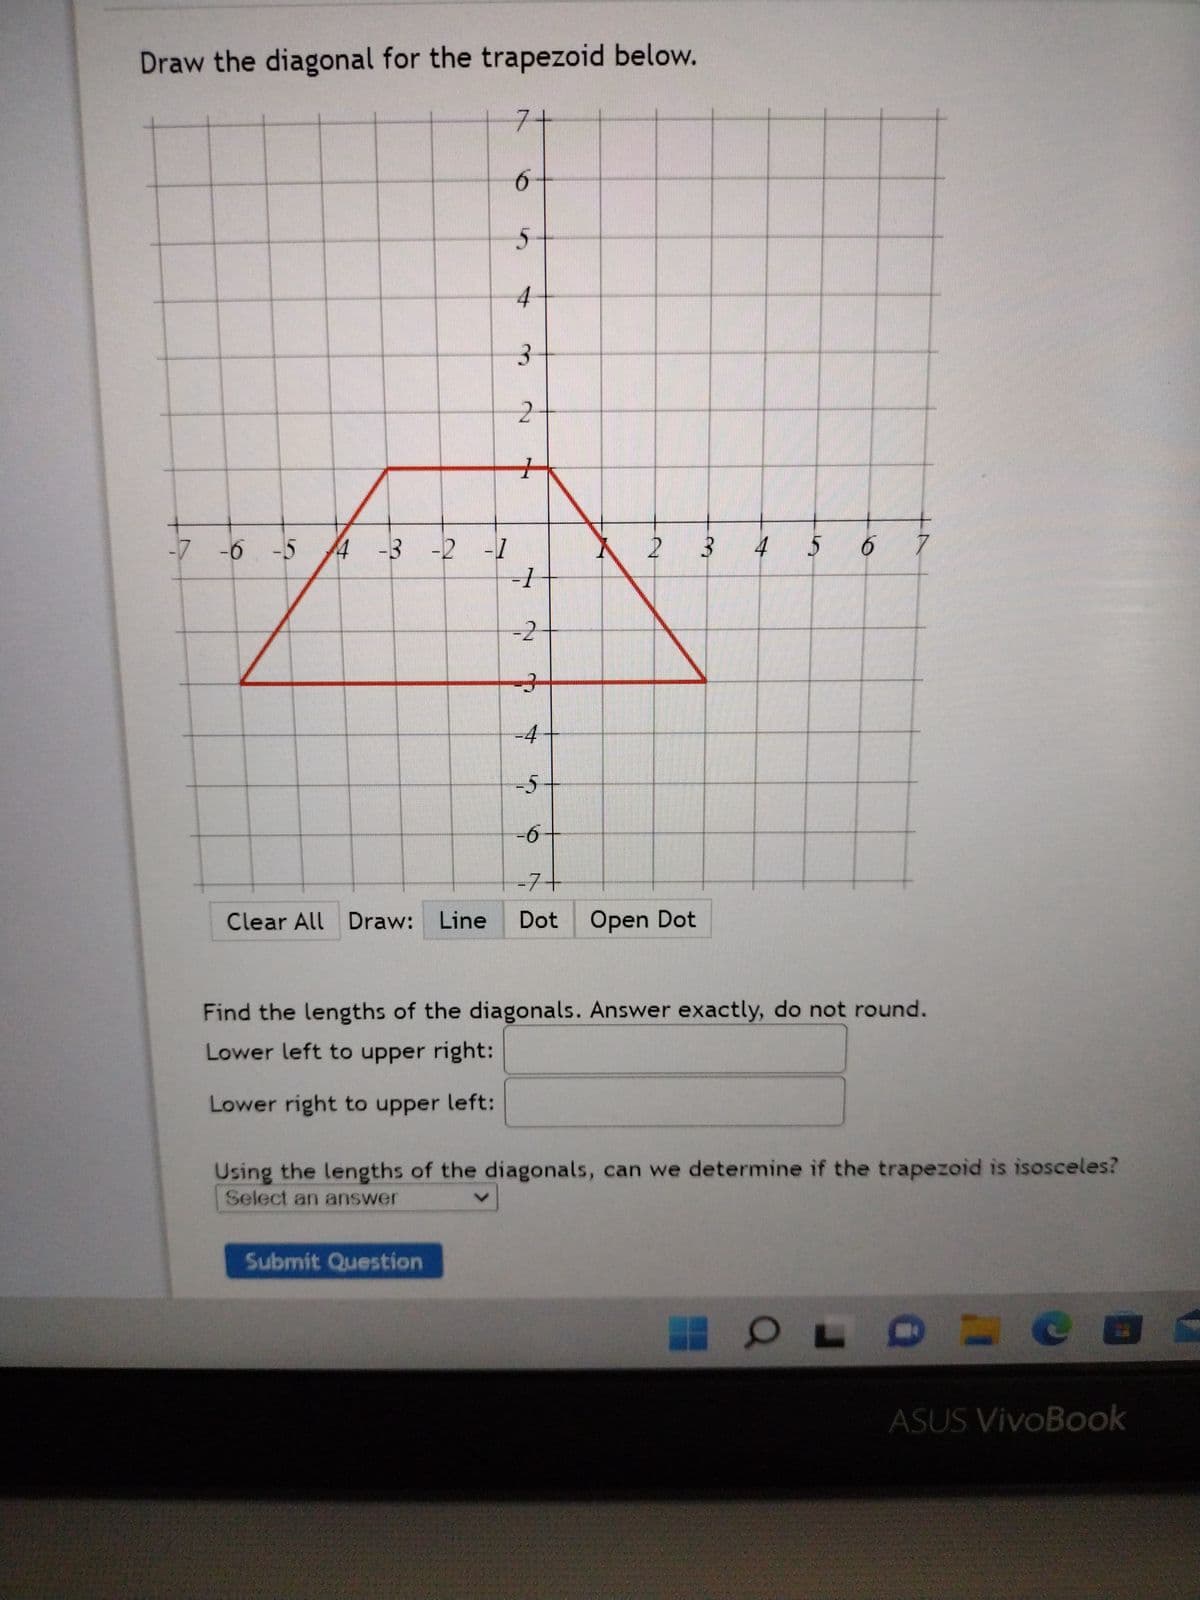 Draw the diagonal for the trapezoid below.
Clear All Draw: Line
7-
6
5
4
Submit Question
3
2
-7 -6 -5 4 -3 -2 -1
-1
7
-2
-4
2
-5
-6
-7+
Dot Open Dot
3 4
5 6 7
Find the lengths of the diagonals. Answer exactly, do not round.
Lower left to upper right:
Lower right to upper left:
Using the lengths of the diagonals, can we determine if the trapezoid is isosceles?
Select an answer
O OL
=
ASUS VivoBook